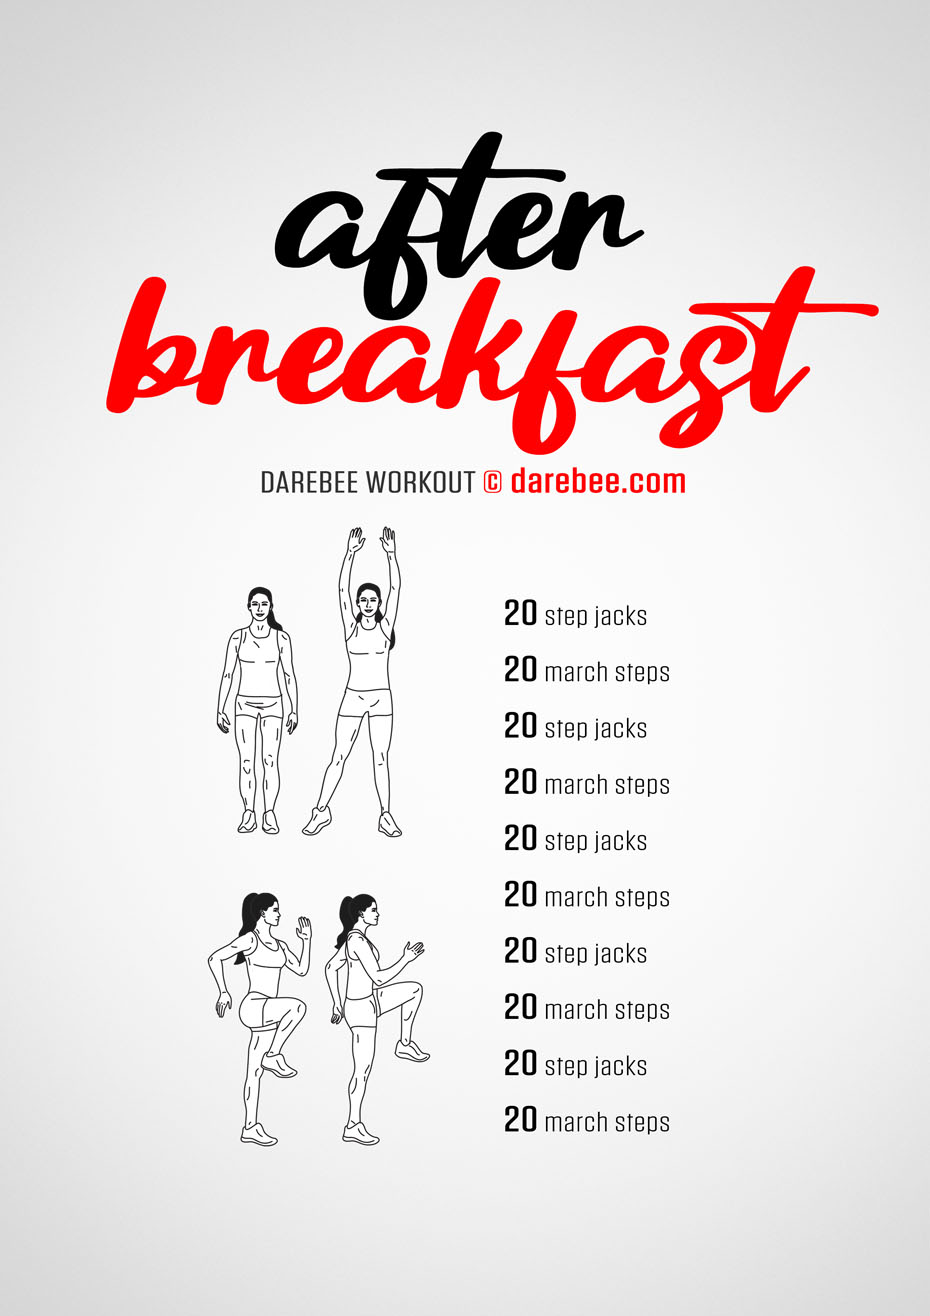 After Breakfast is a DAREBEE home fitness, no-equipment aerobic and cardiovascular workout that will help you improve your endurance.